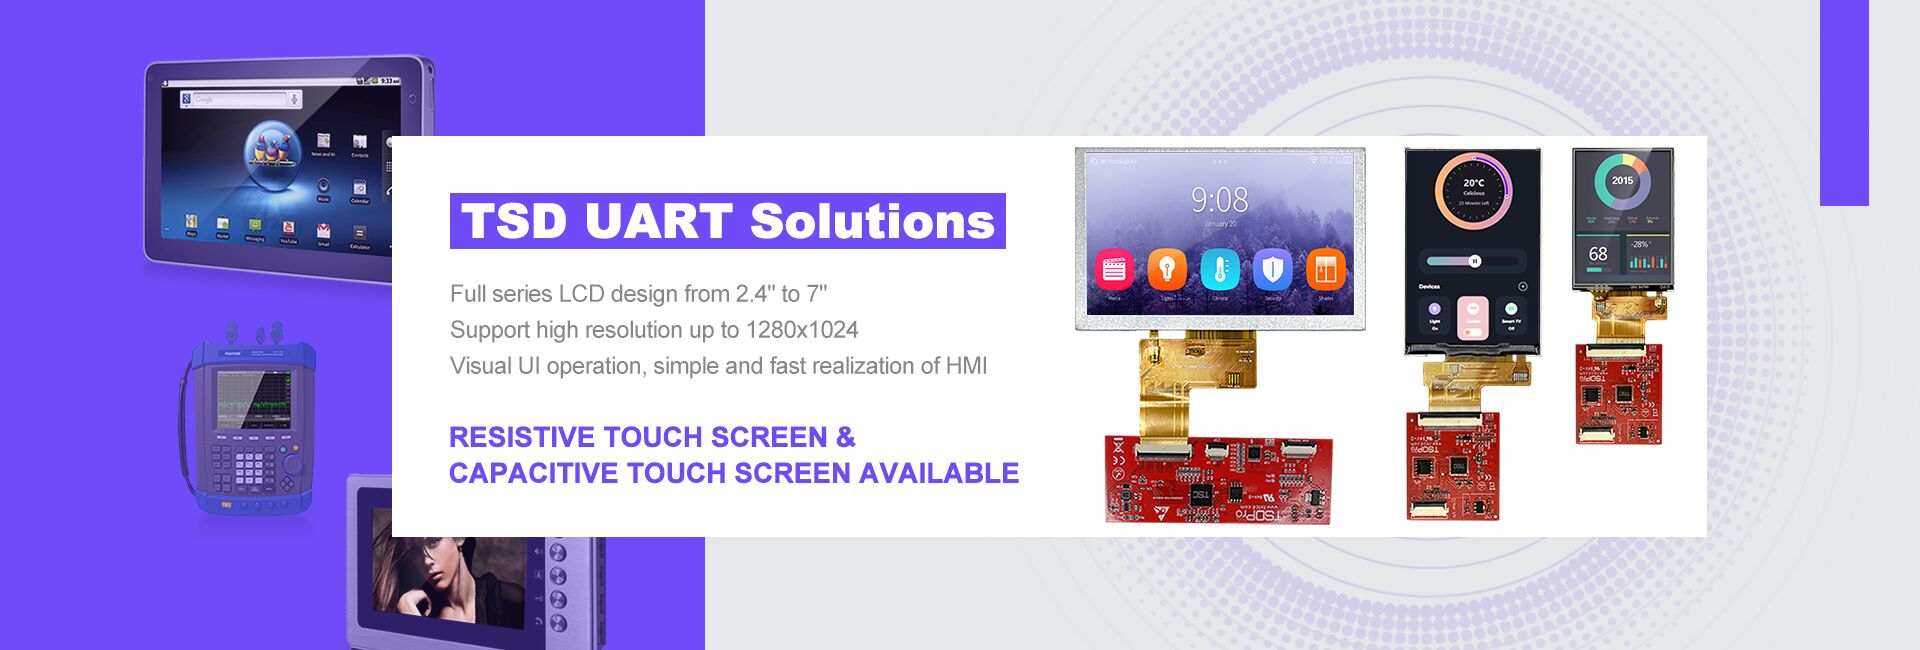 TSD Pro UART LCD display solution is coming now!